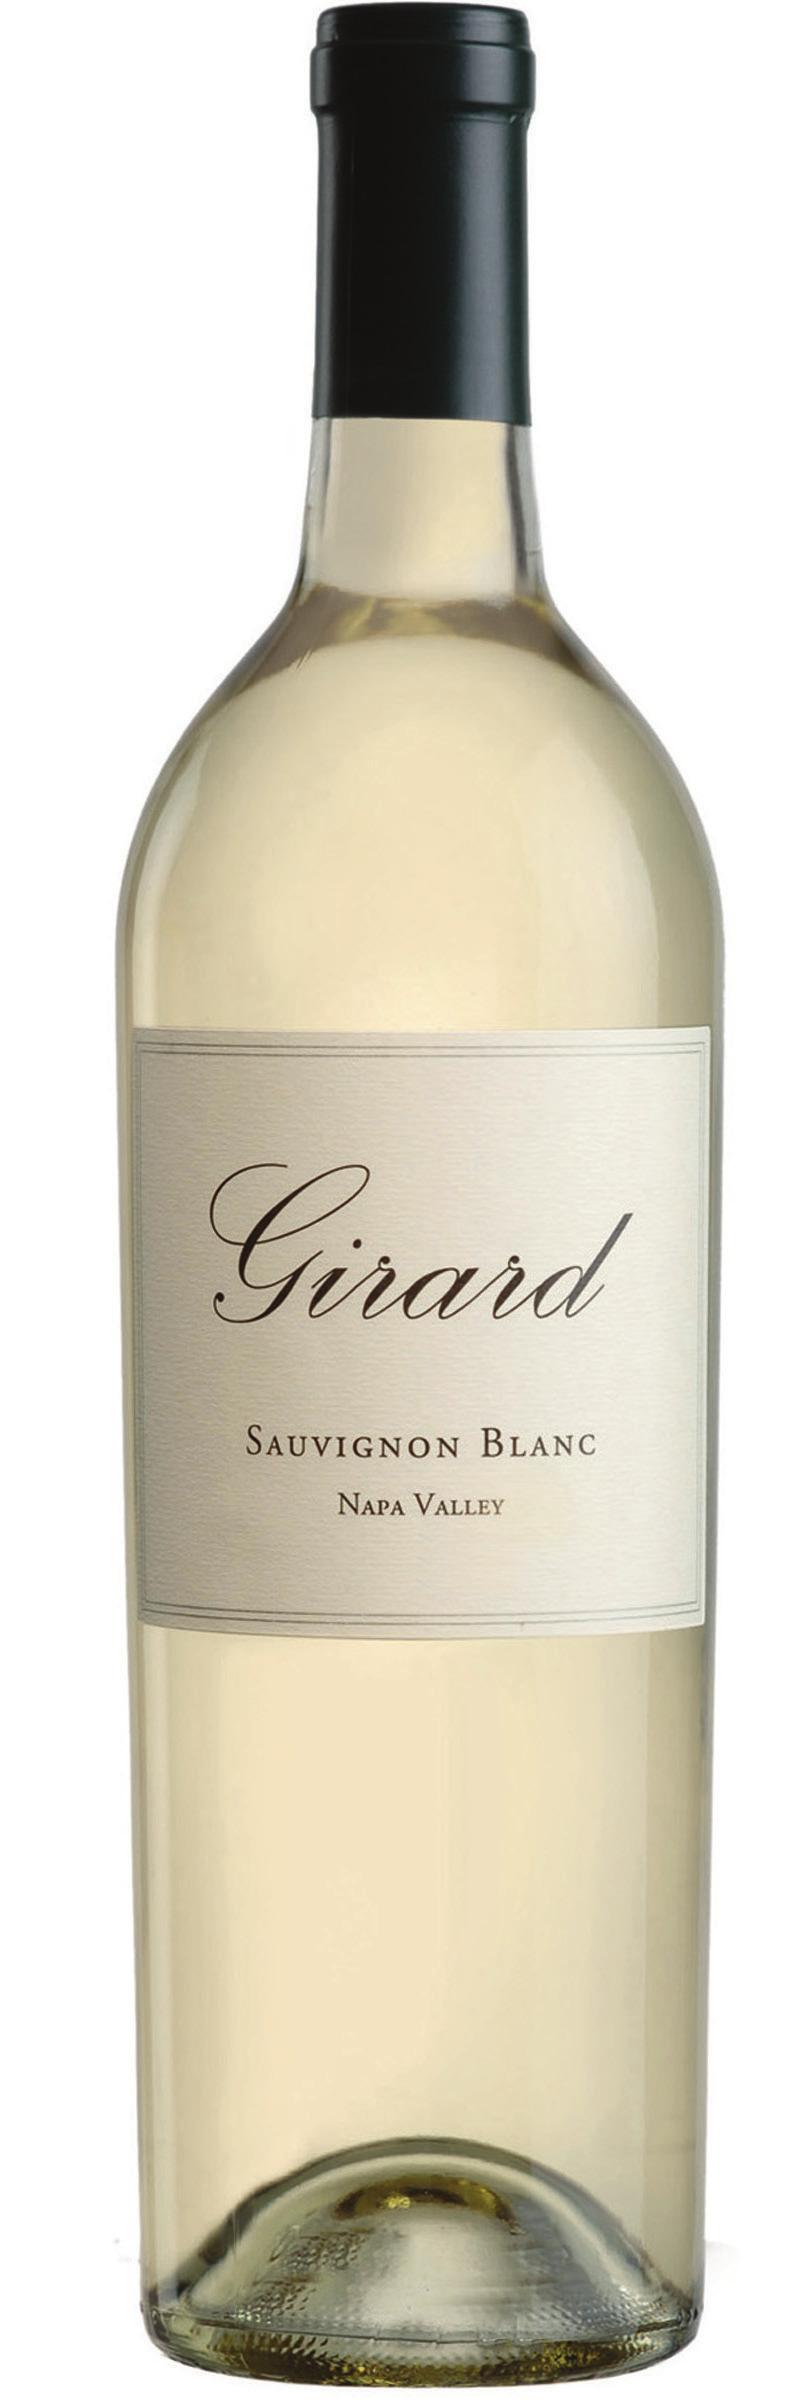 2014 Sauvignon Blanc Napa Valley Aromatics uphold lemon, passion fruit and stone fruit. The palate begins with bright, crisp acidity followed by tropical mango and green apple.